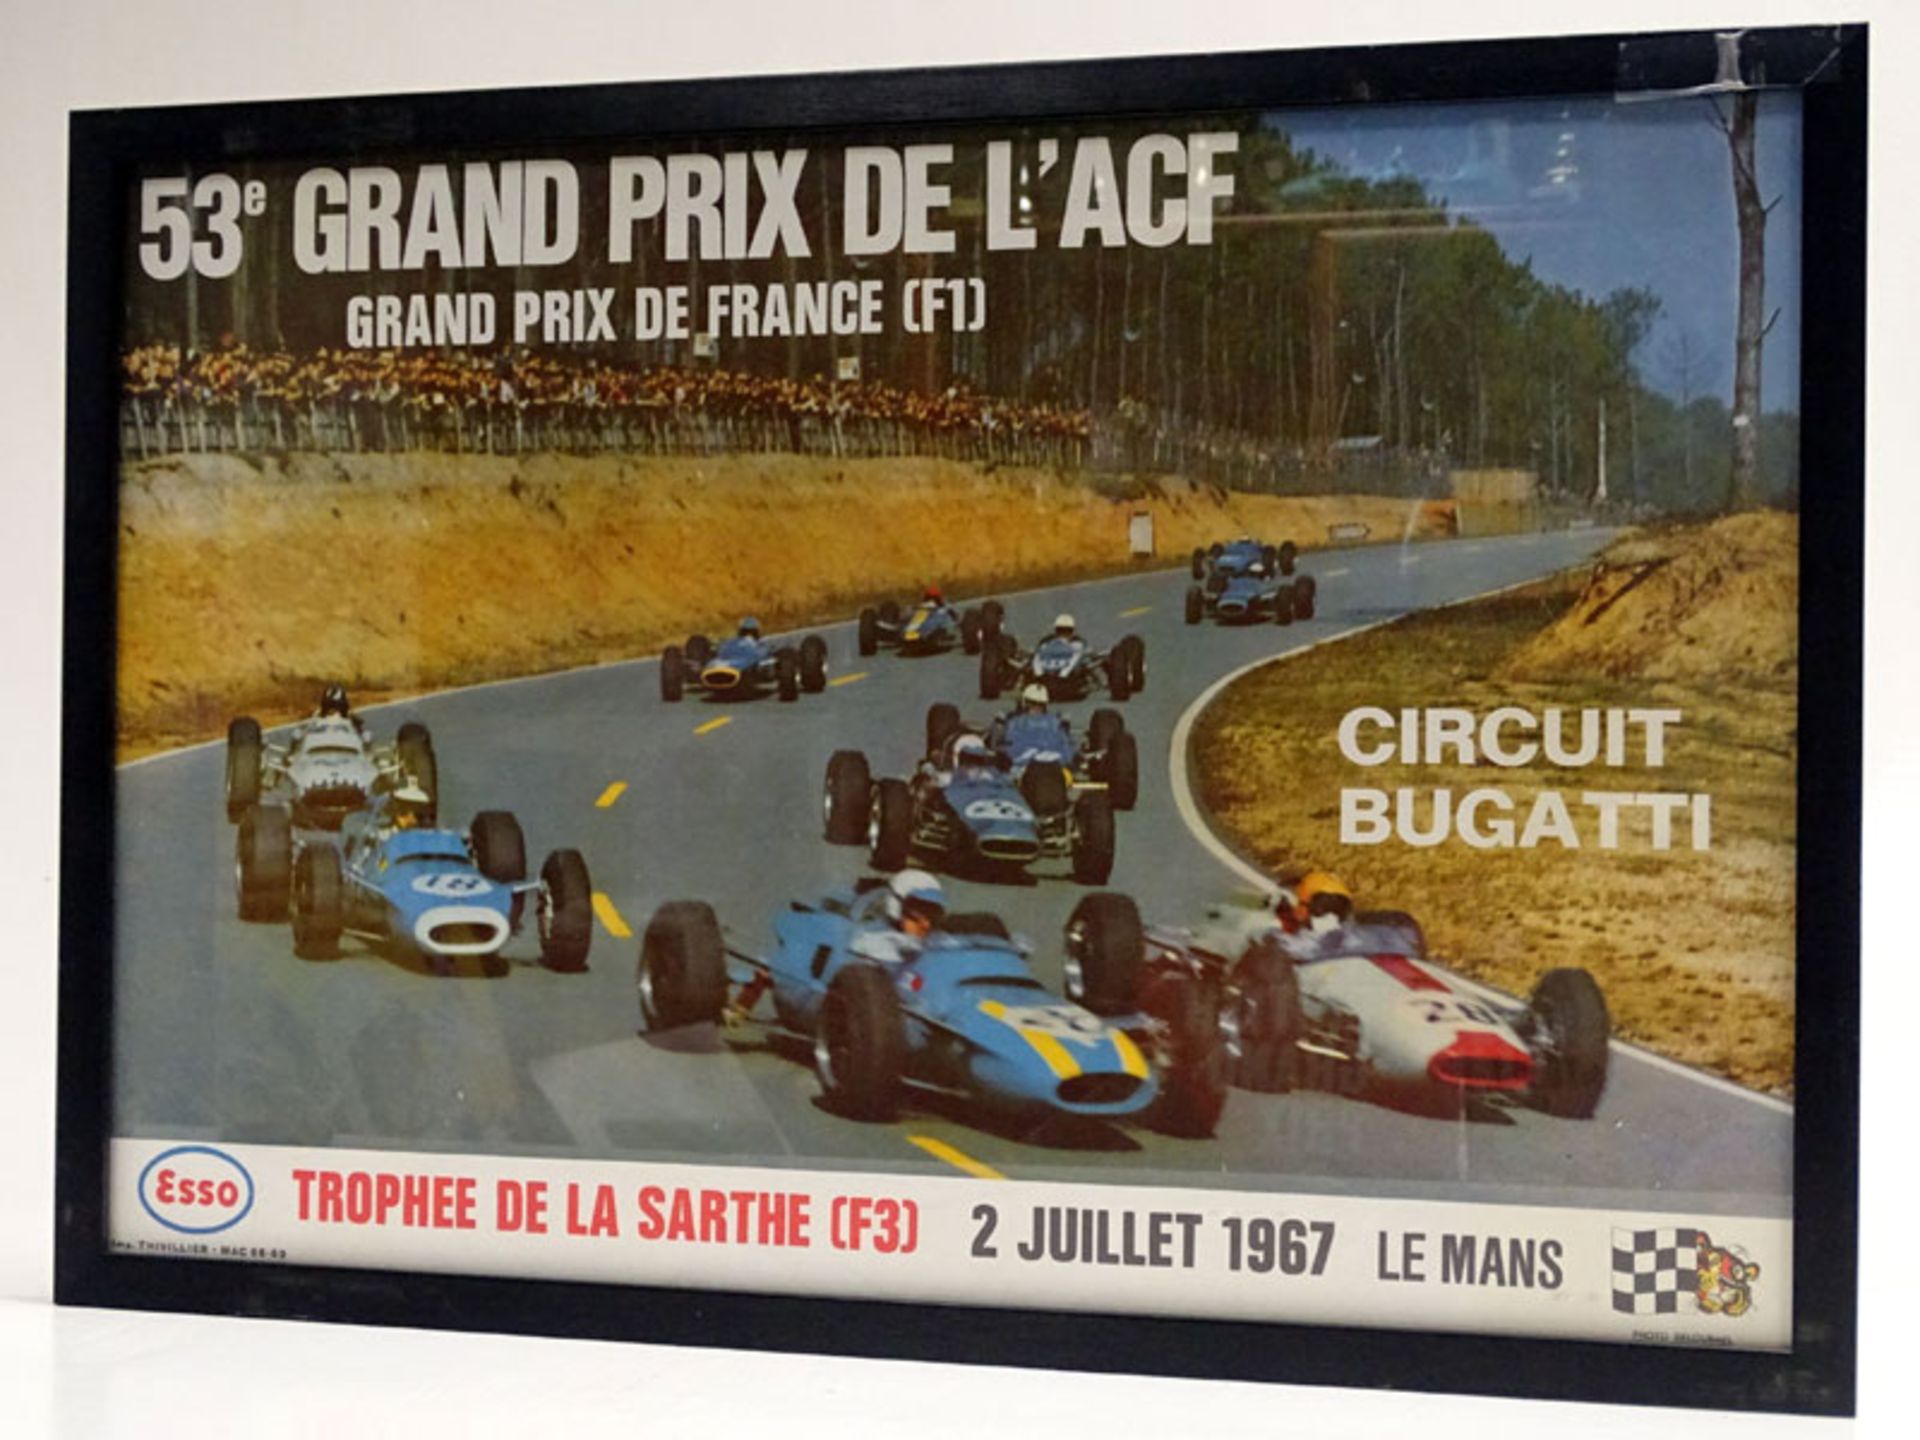 An Original French Grand Prix Advertising Poster, 1967